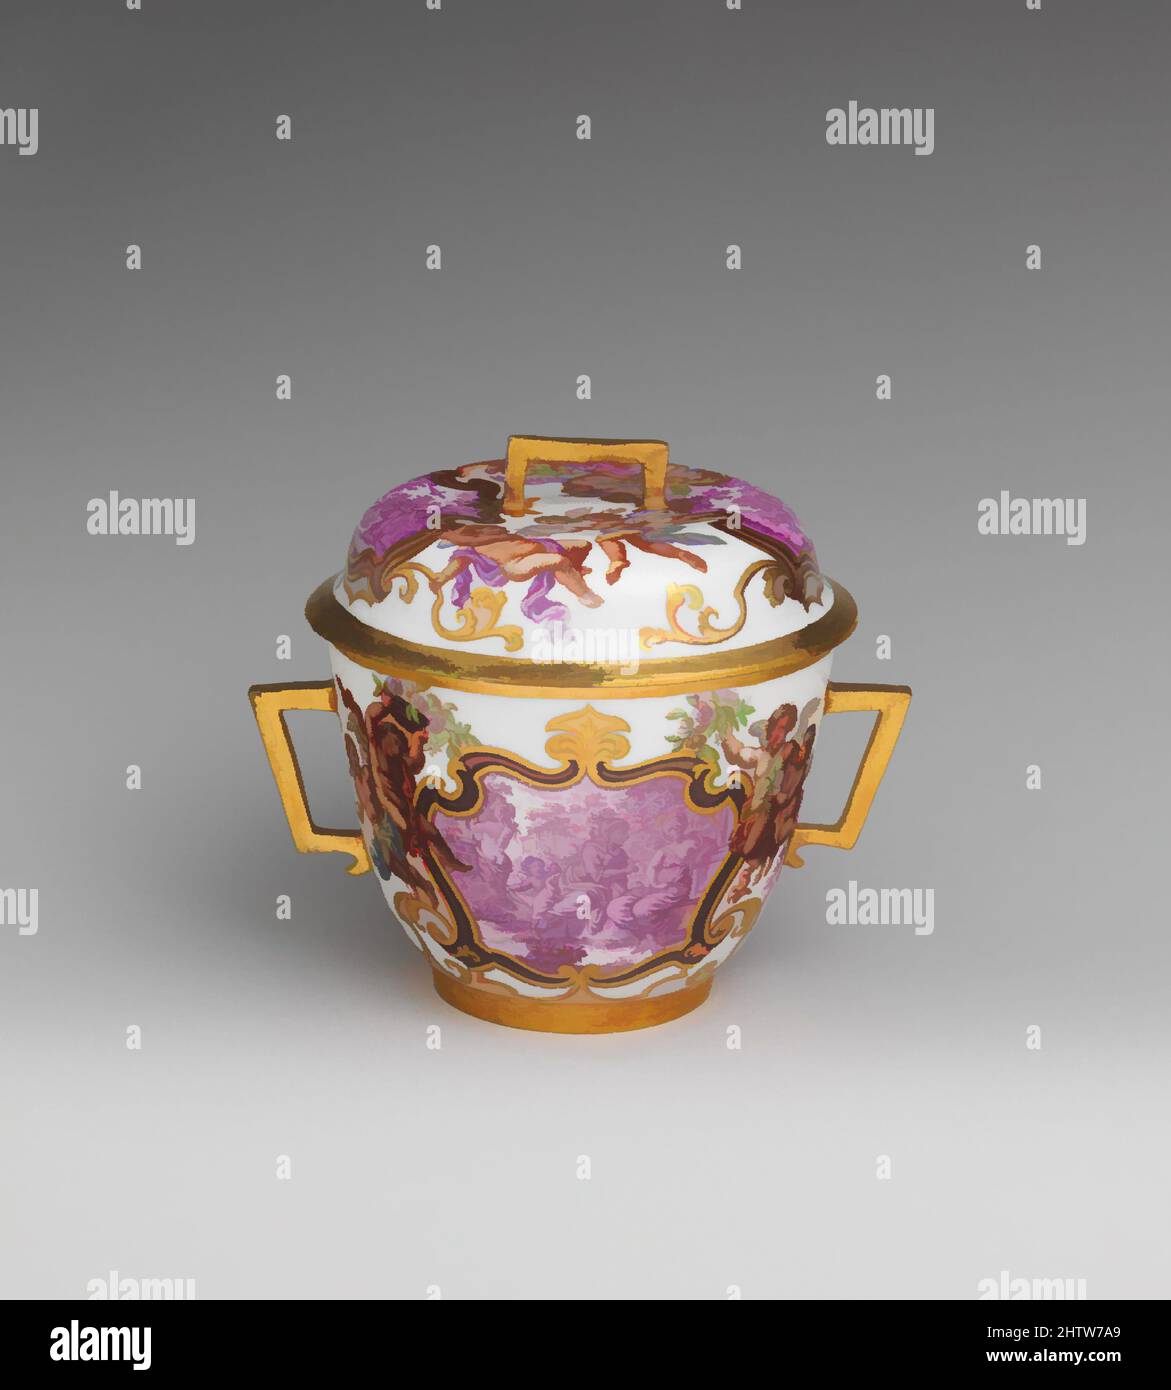 Art inspired by Two-handled cup with cover, 1725–30, German, Meissen, Hard-paste porcelain, Height: 4 3/4 in. (12.1 cm), Ceramics-Porcelain, Classic works modernized by Artotop with a splash of modernity. Shapes, color and value, eye-catching visual impact on art. Emotions through freedom of artworks in a contemporary way. A timeless message pursuing a wildly creative new direction. Artists turning to the digital medium and creating the Artotop NFT Stock Photo